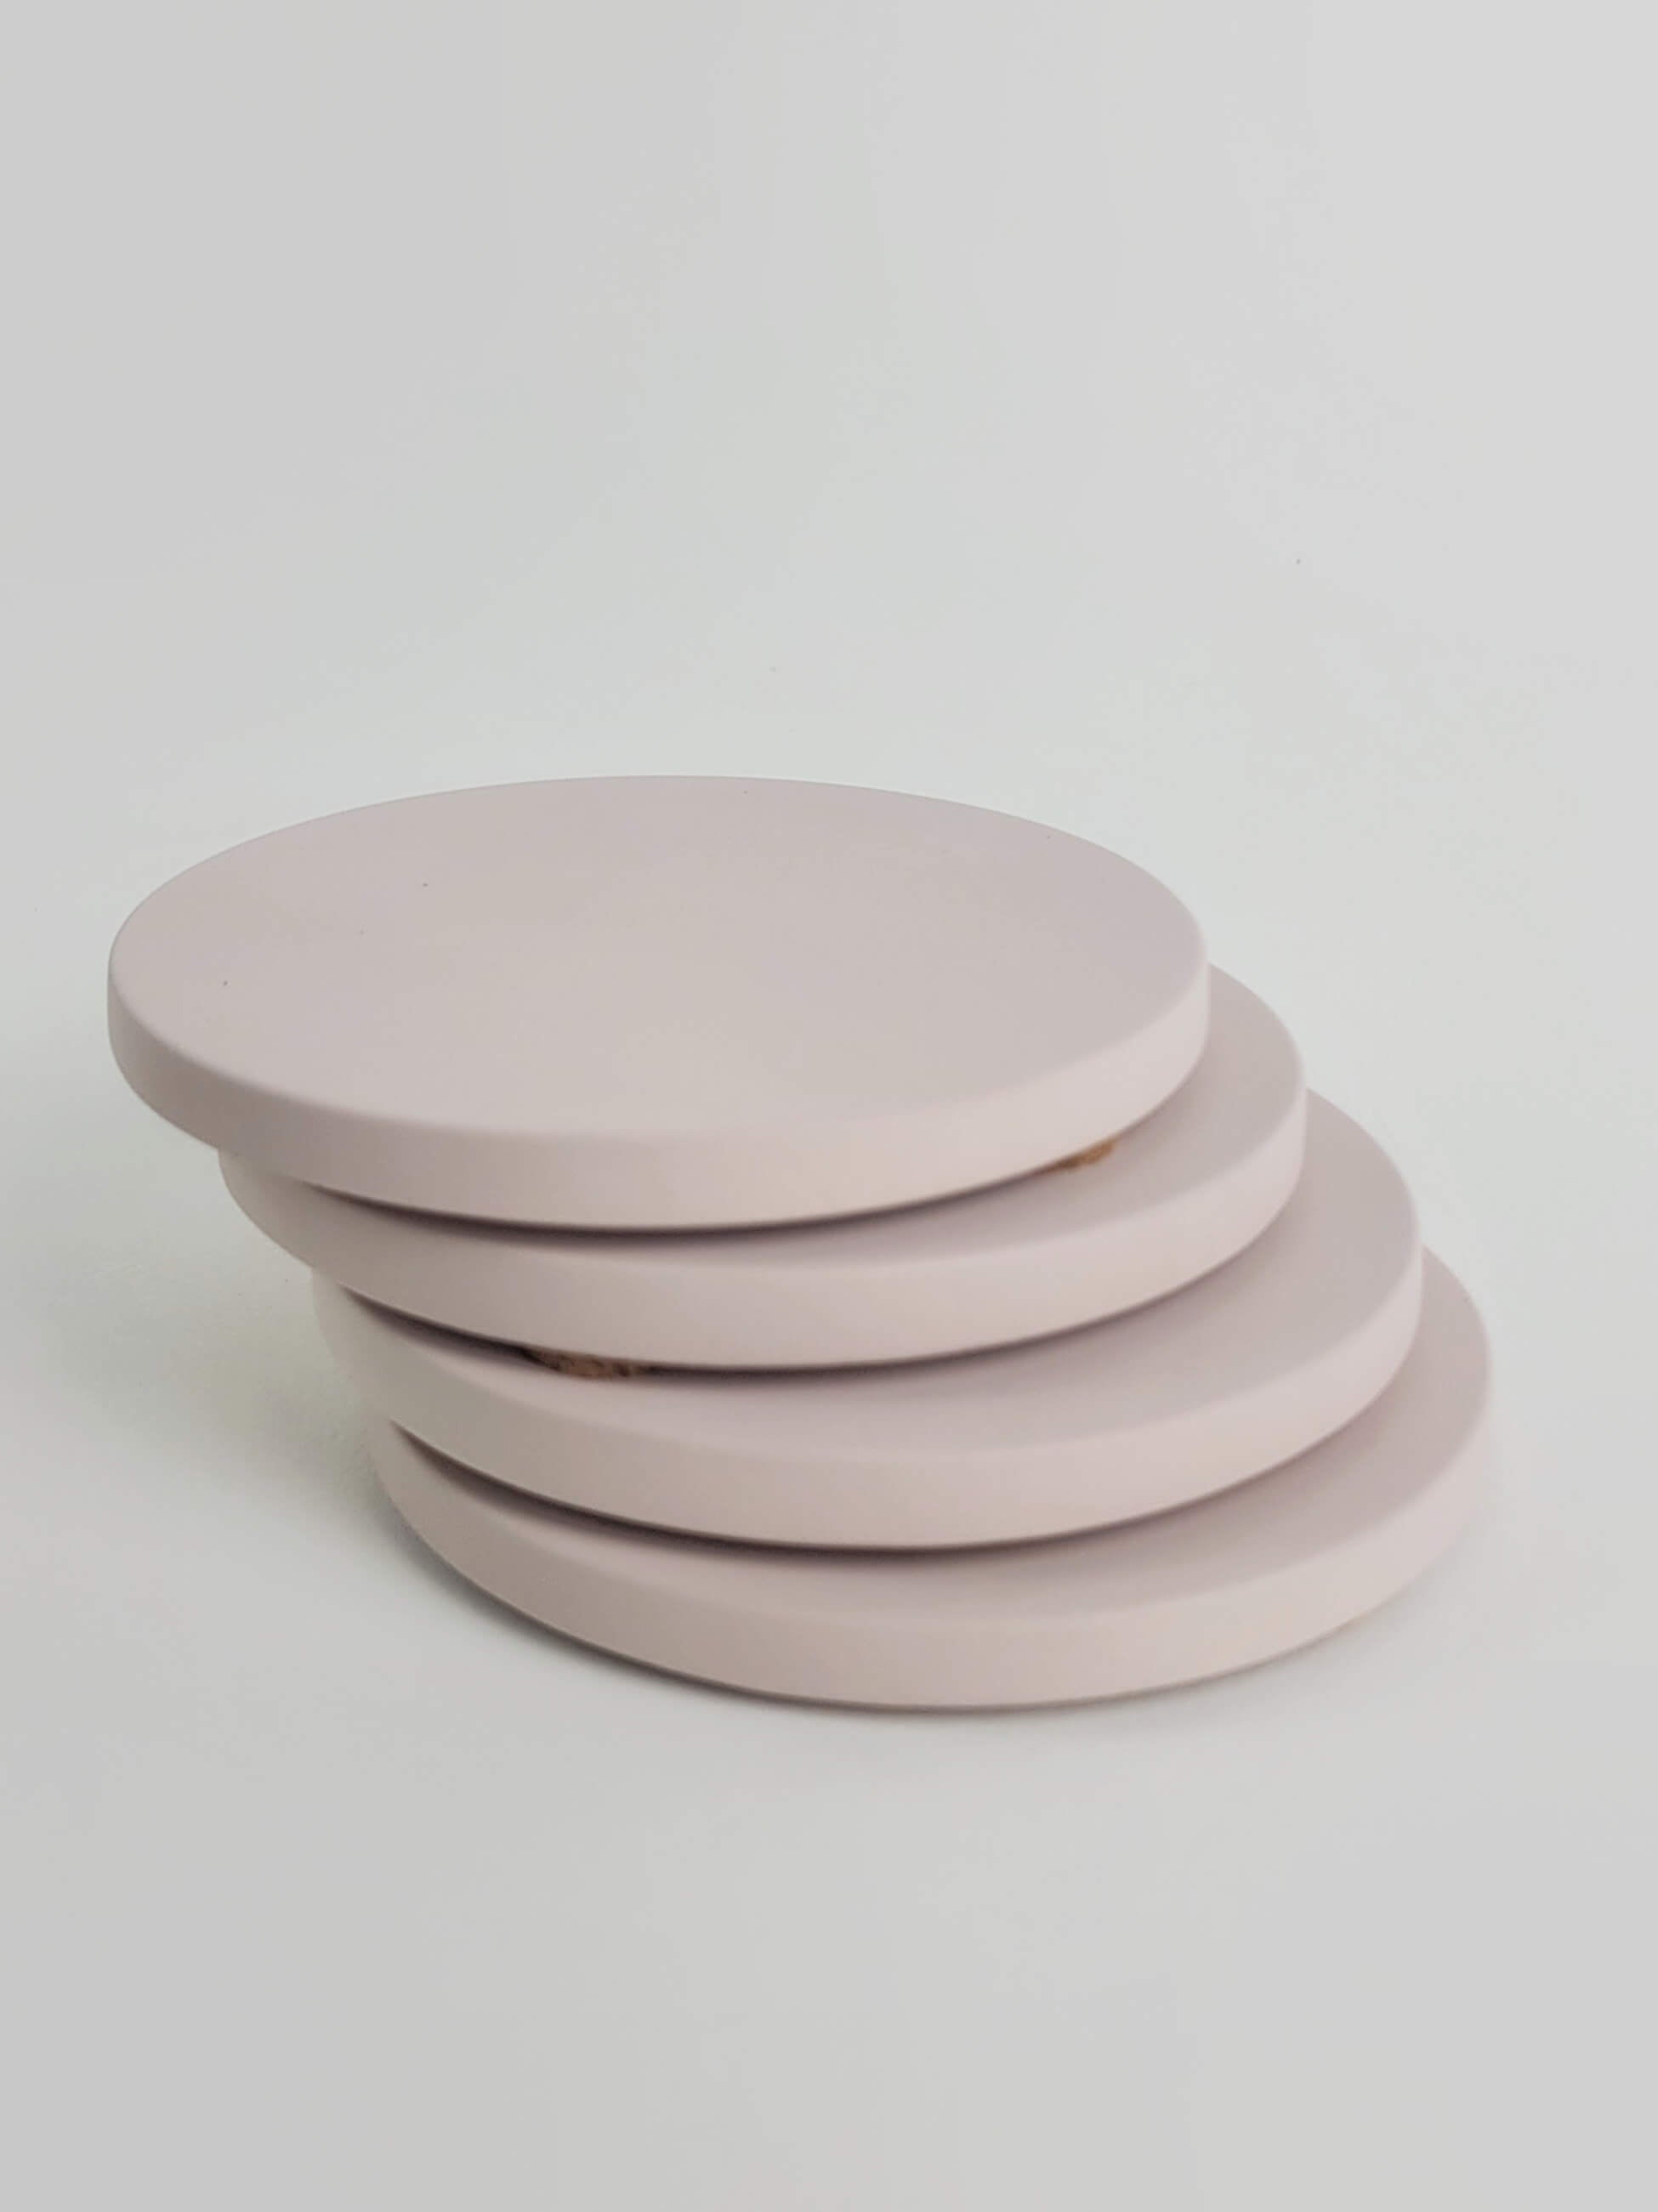 Stack of 4 pastel pink concrete coasters, elegantly arranged in a vertical column.